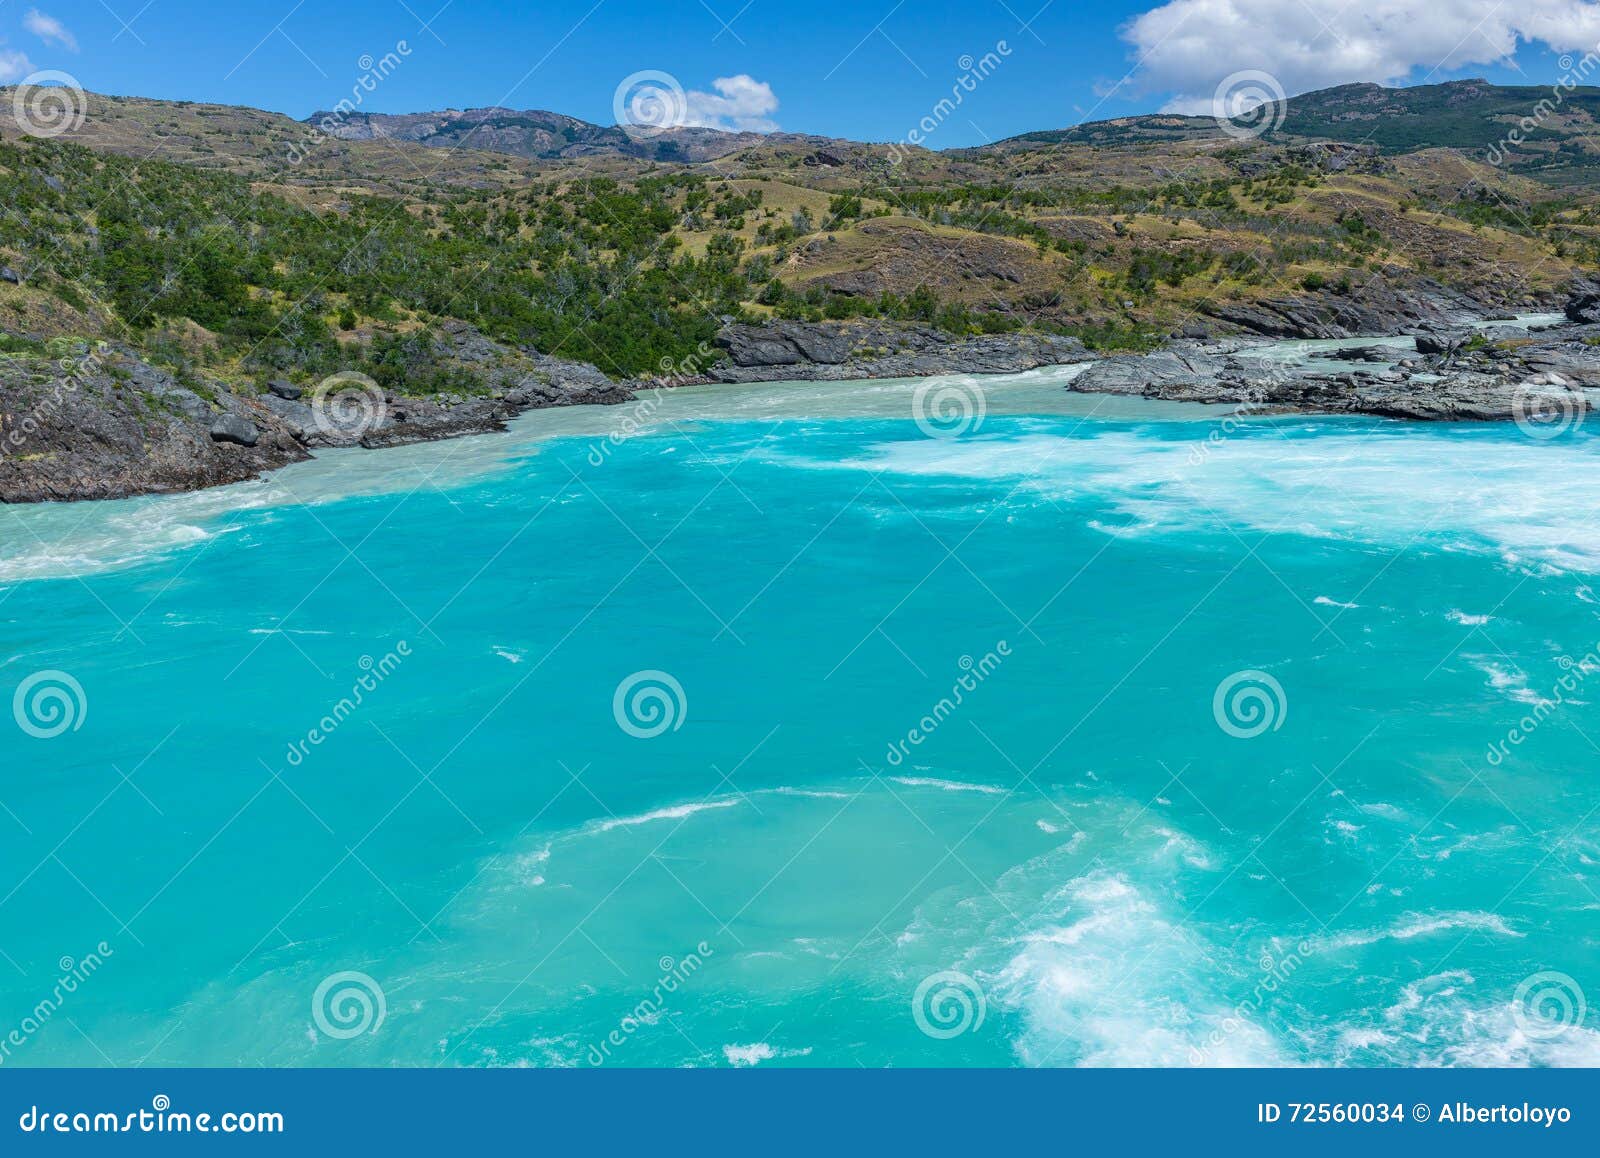 confluence of baker river and neff river, chile